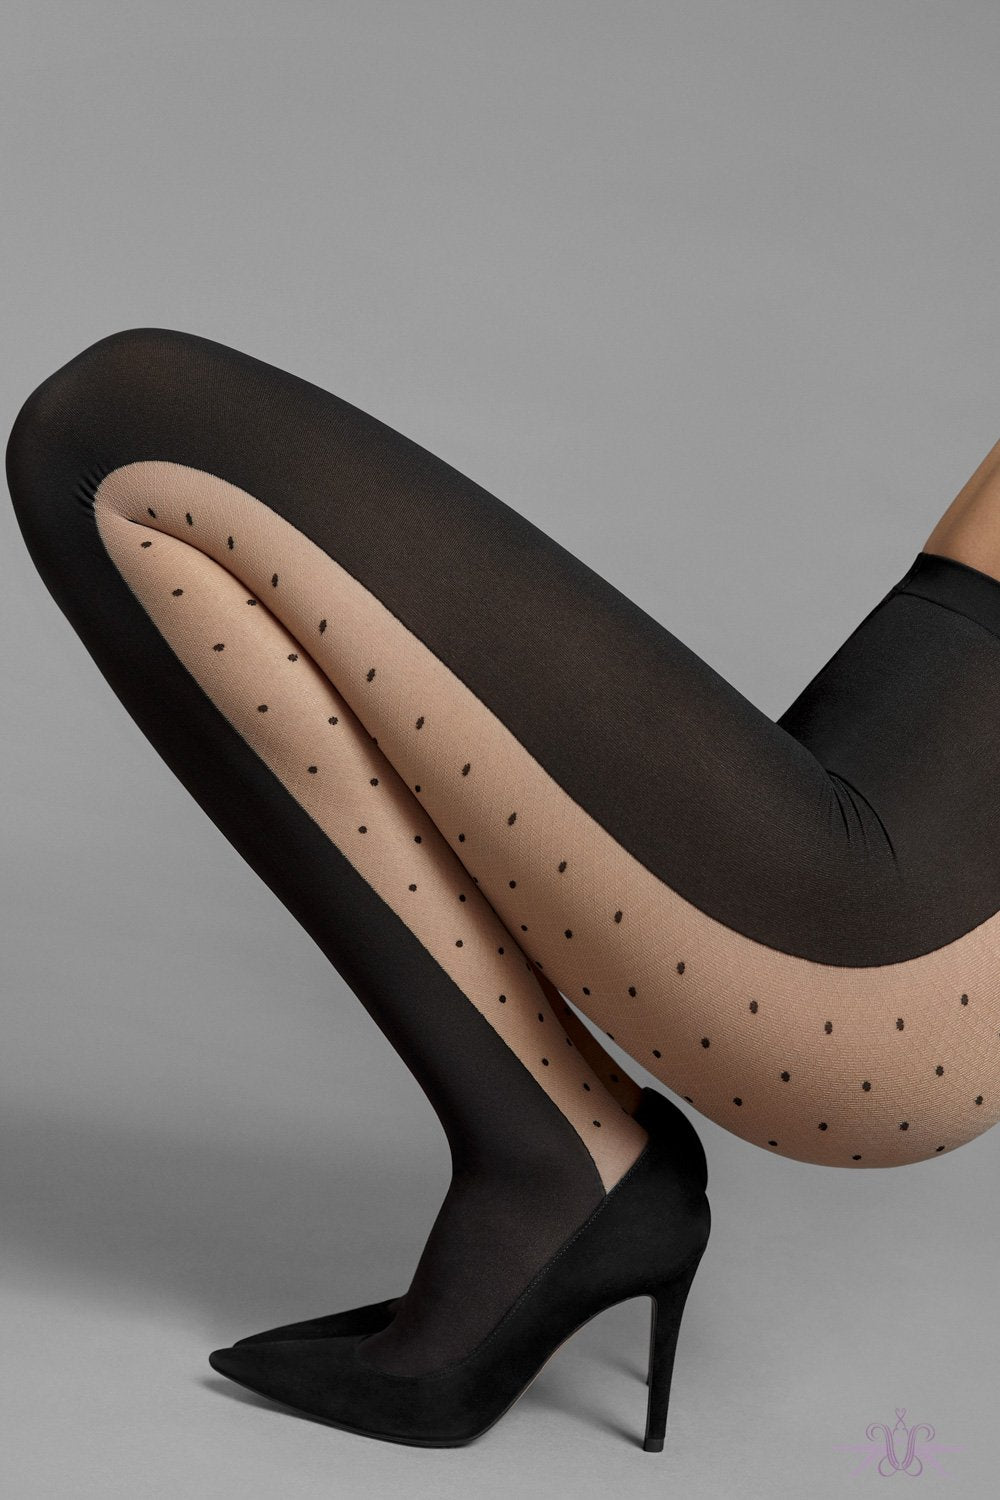 Wolford Felicitas Tights